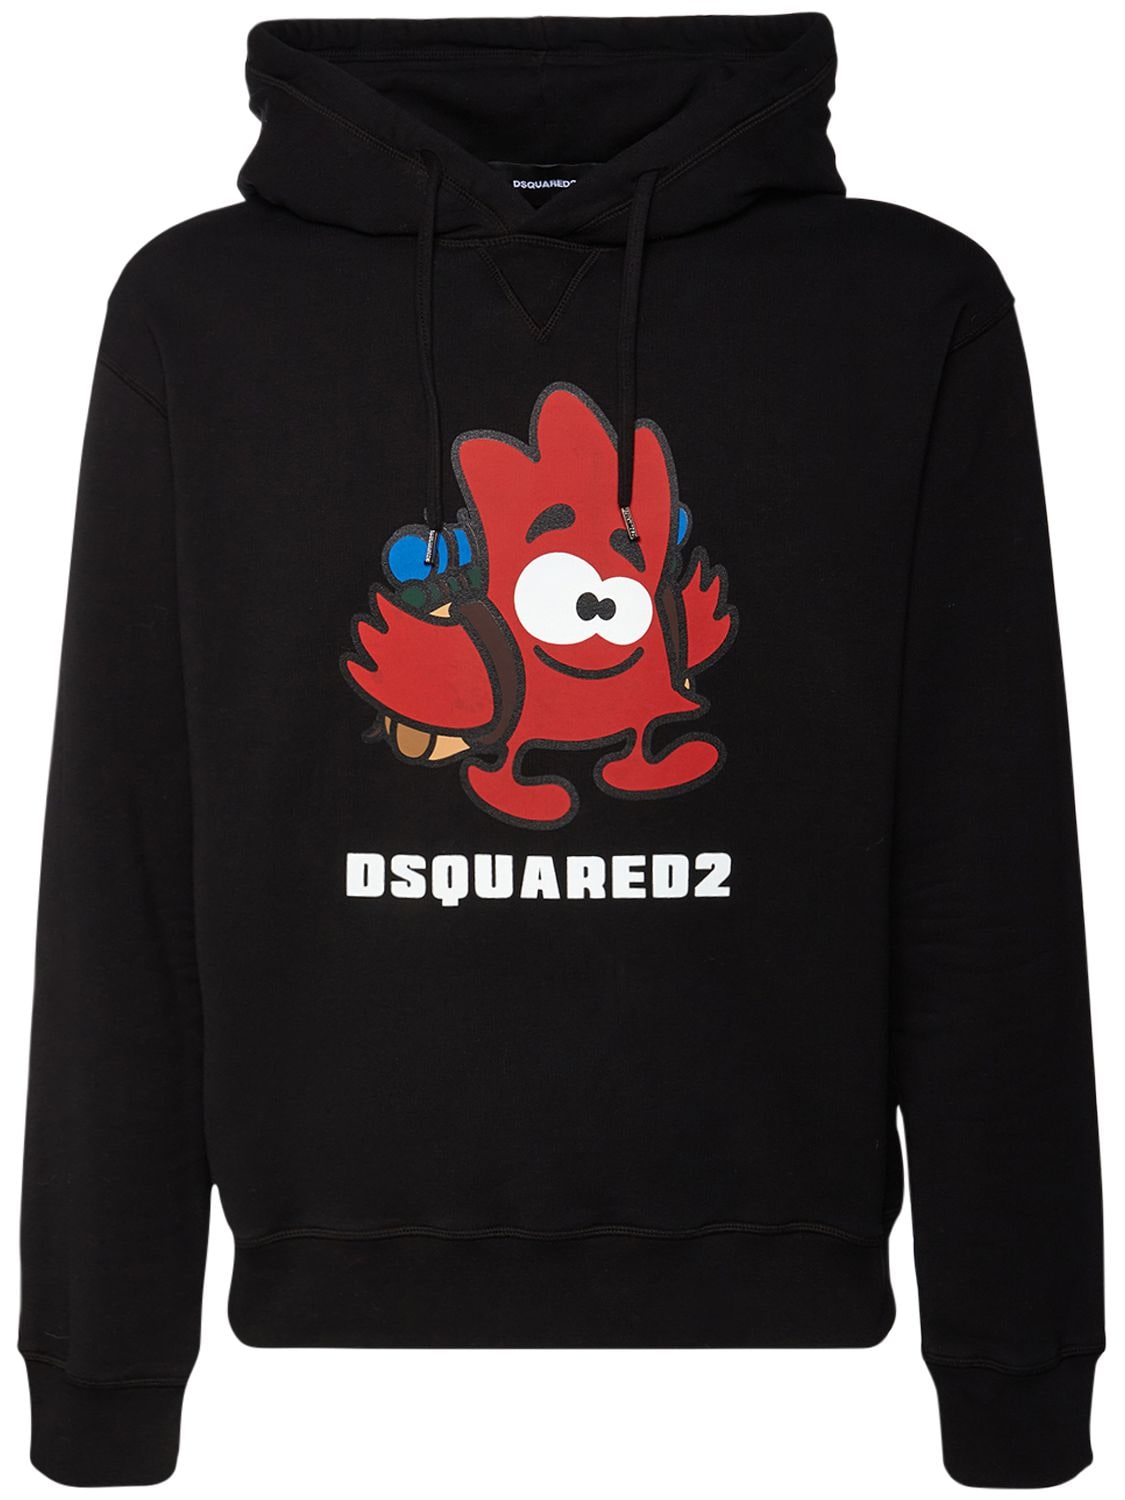 DSQUARED2 Printed Cotton Jersey Hoodie